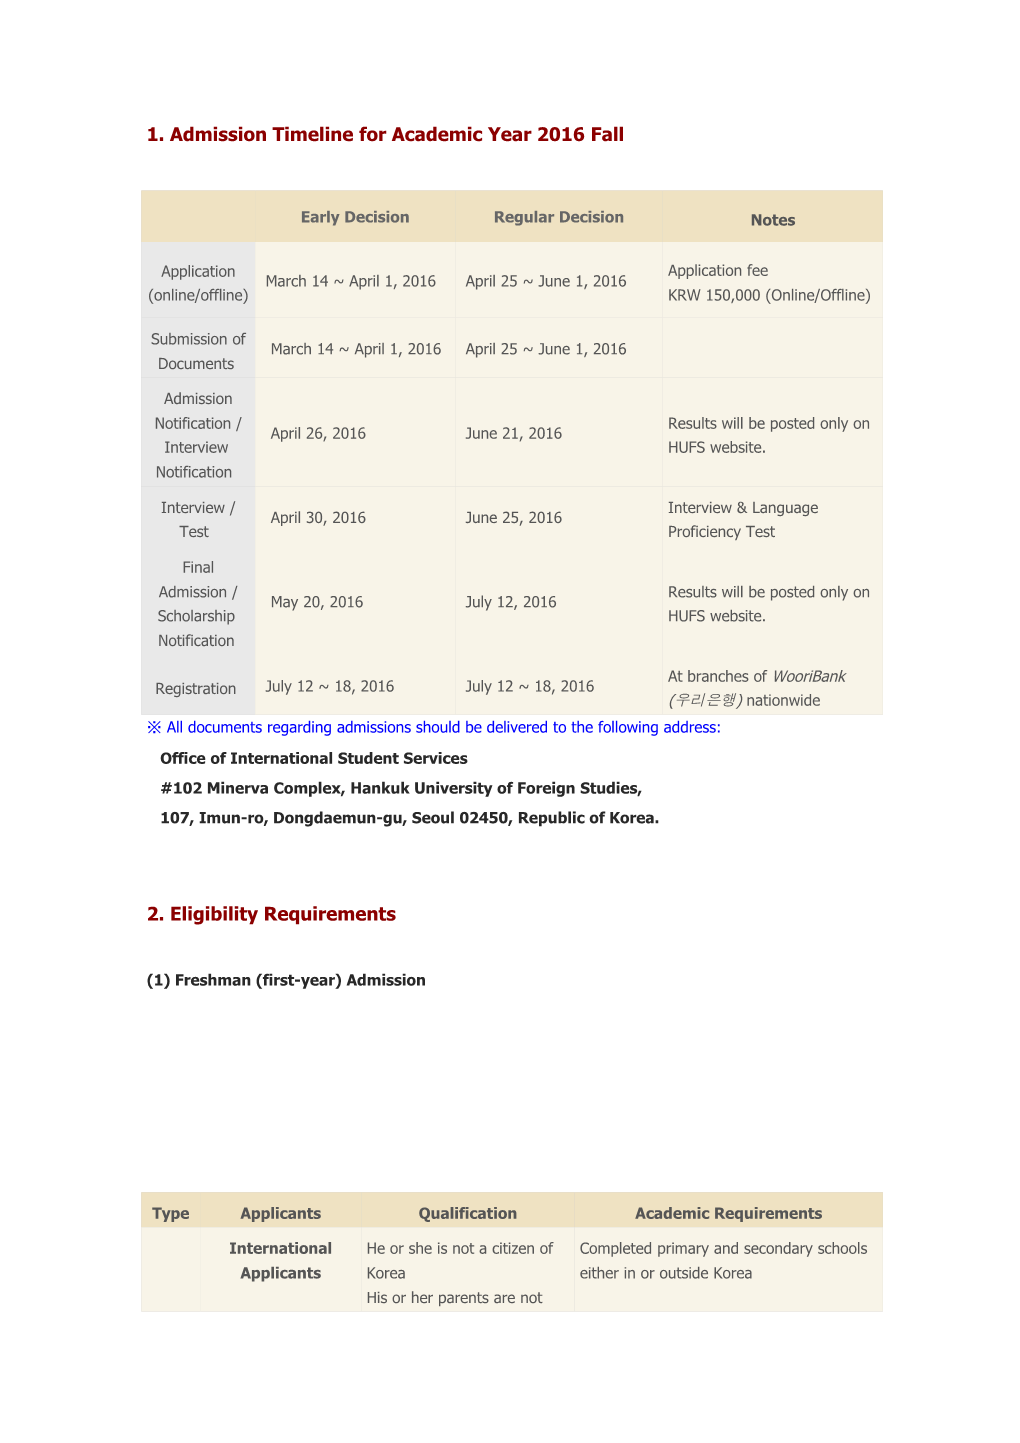 1. Admission Timeline for Academic Year 2016Fall